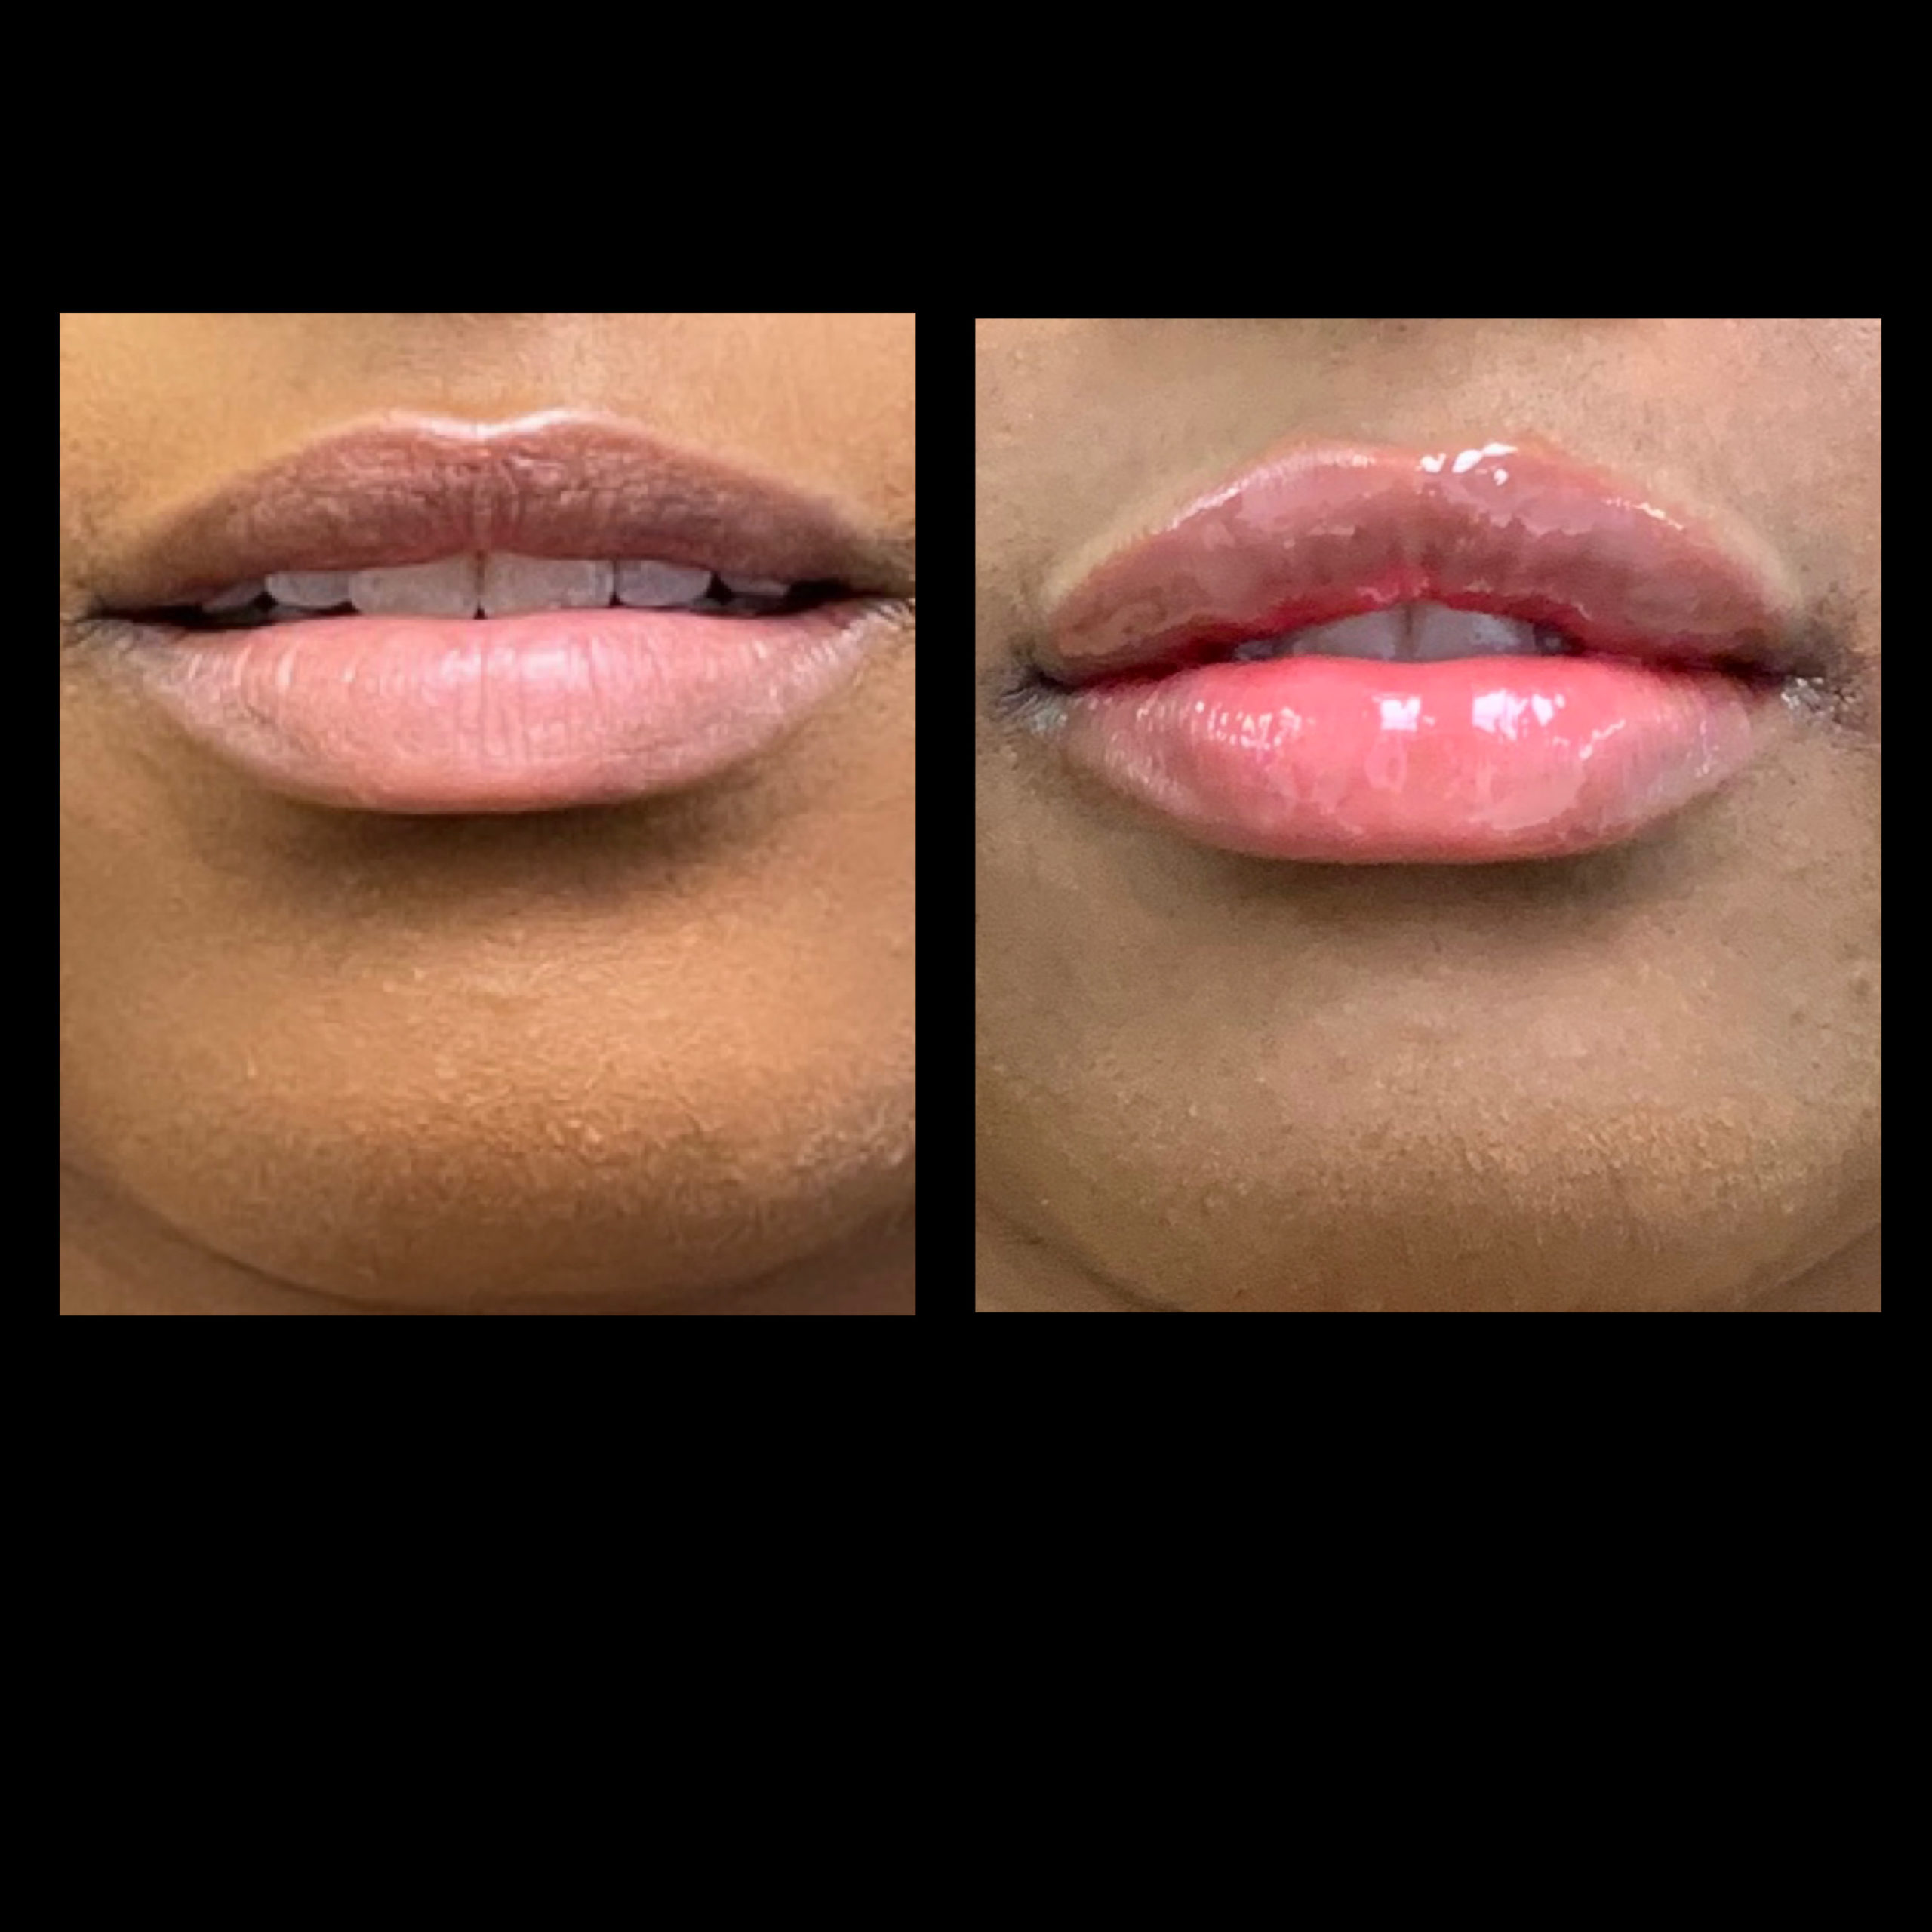 Lip Plump Before & After Photos | The Better Body Shop MedSpa In Houston, TX